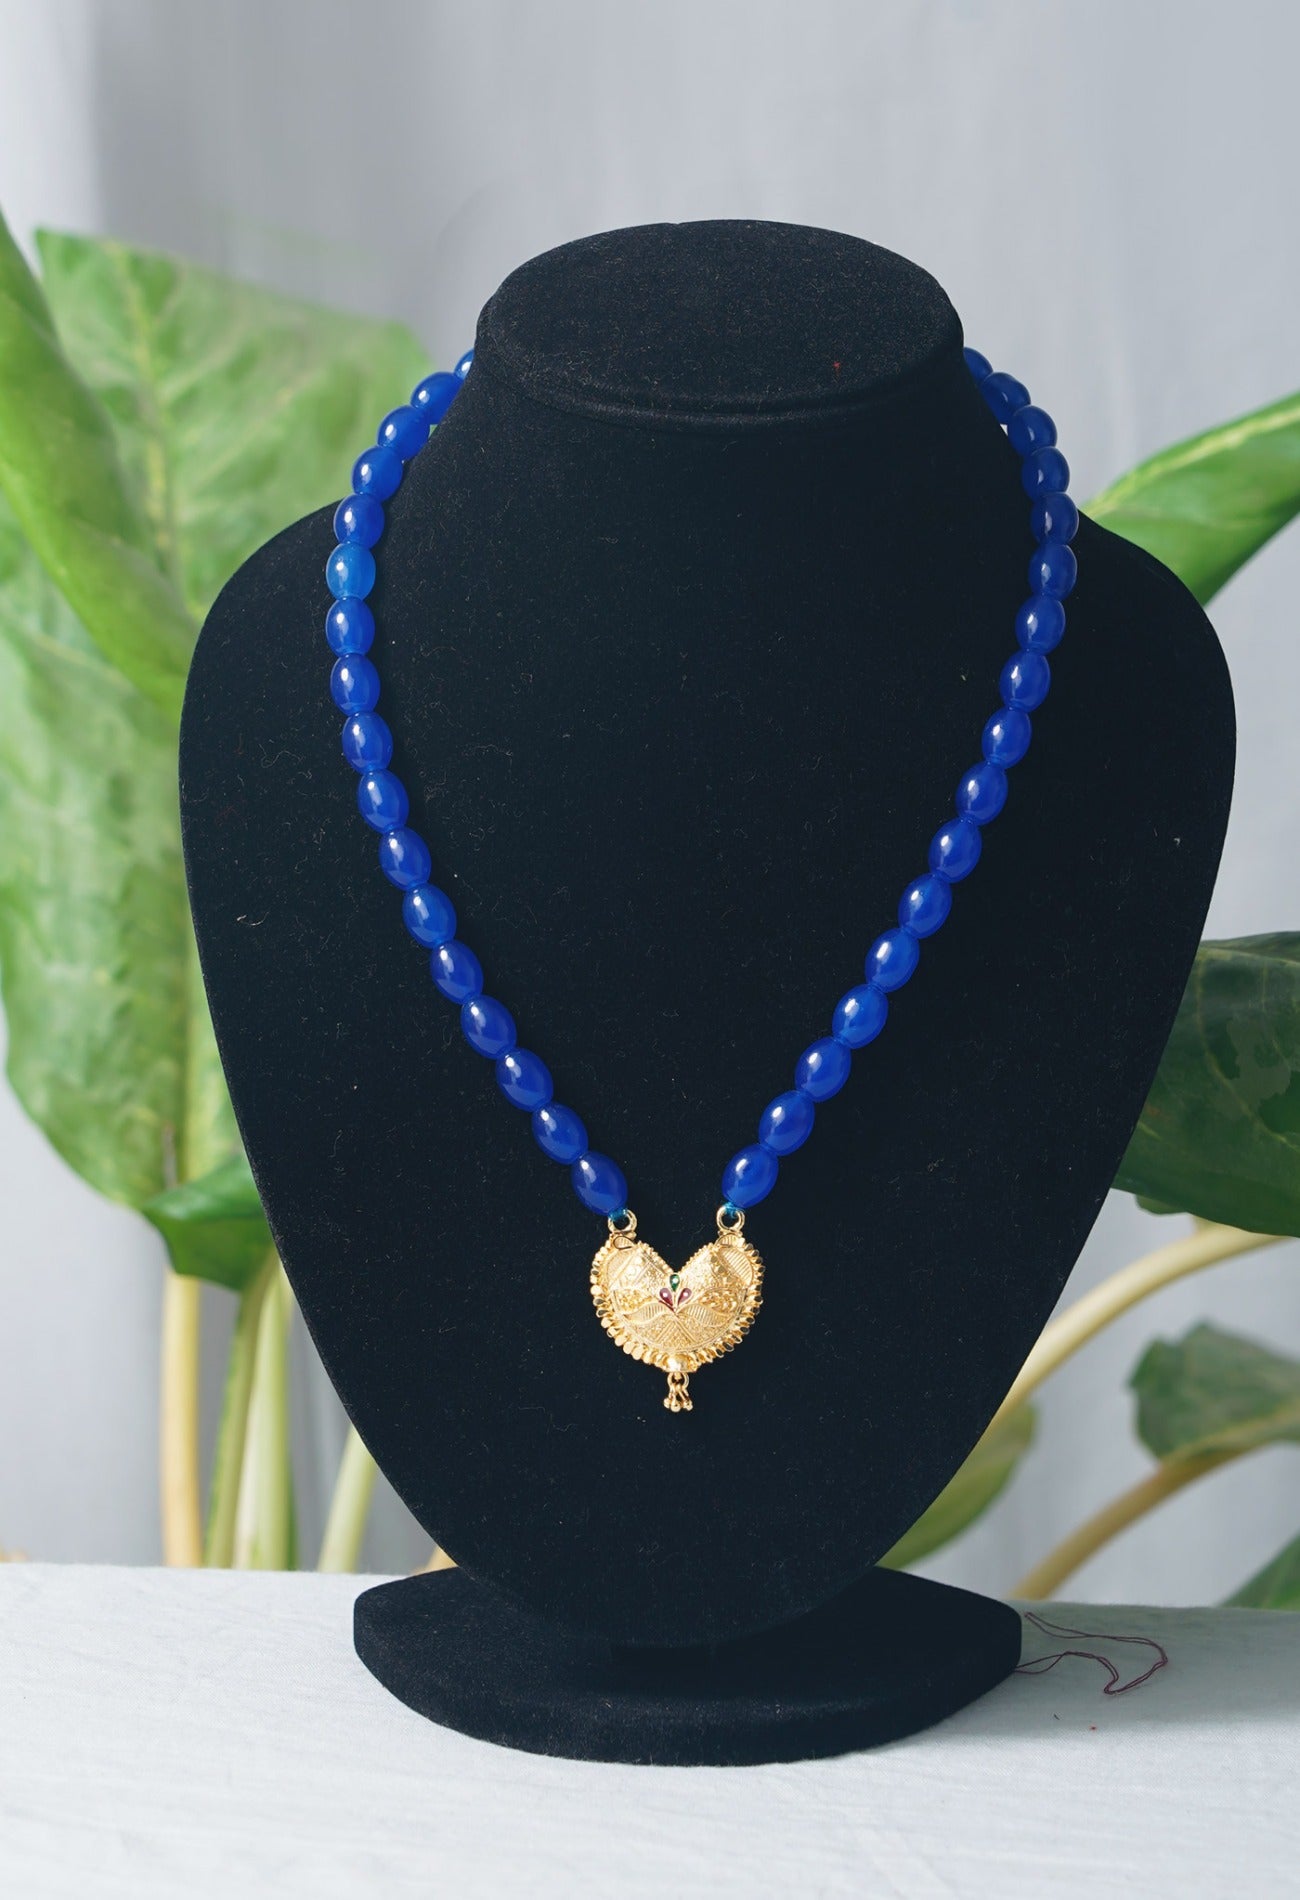 Online Shopping for Blue Amravati Round Beads Necklace with Pendent with jewellery from Andhra pradesh at Unnatisilks.com India
